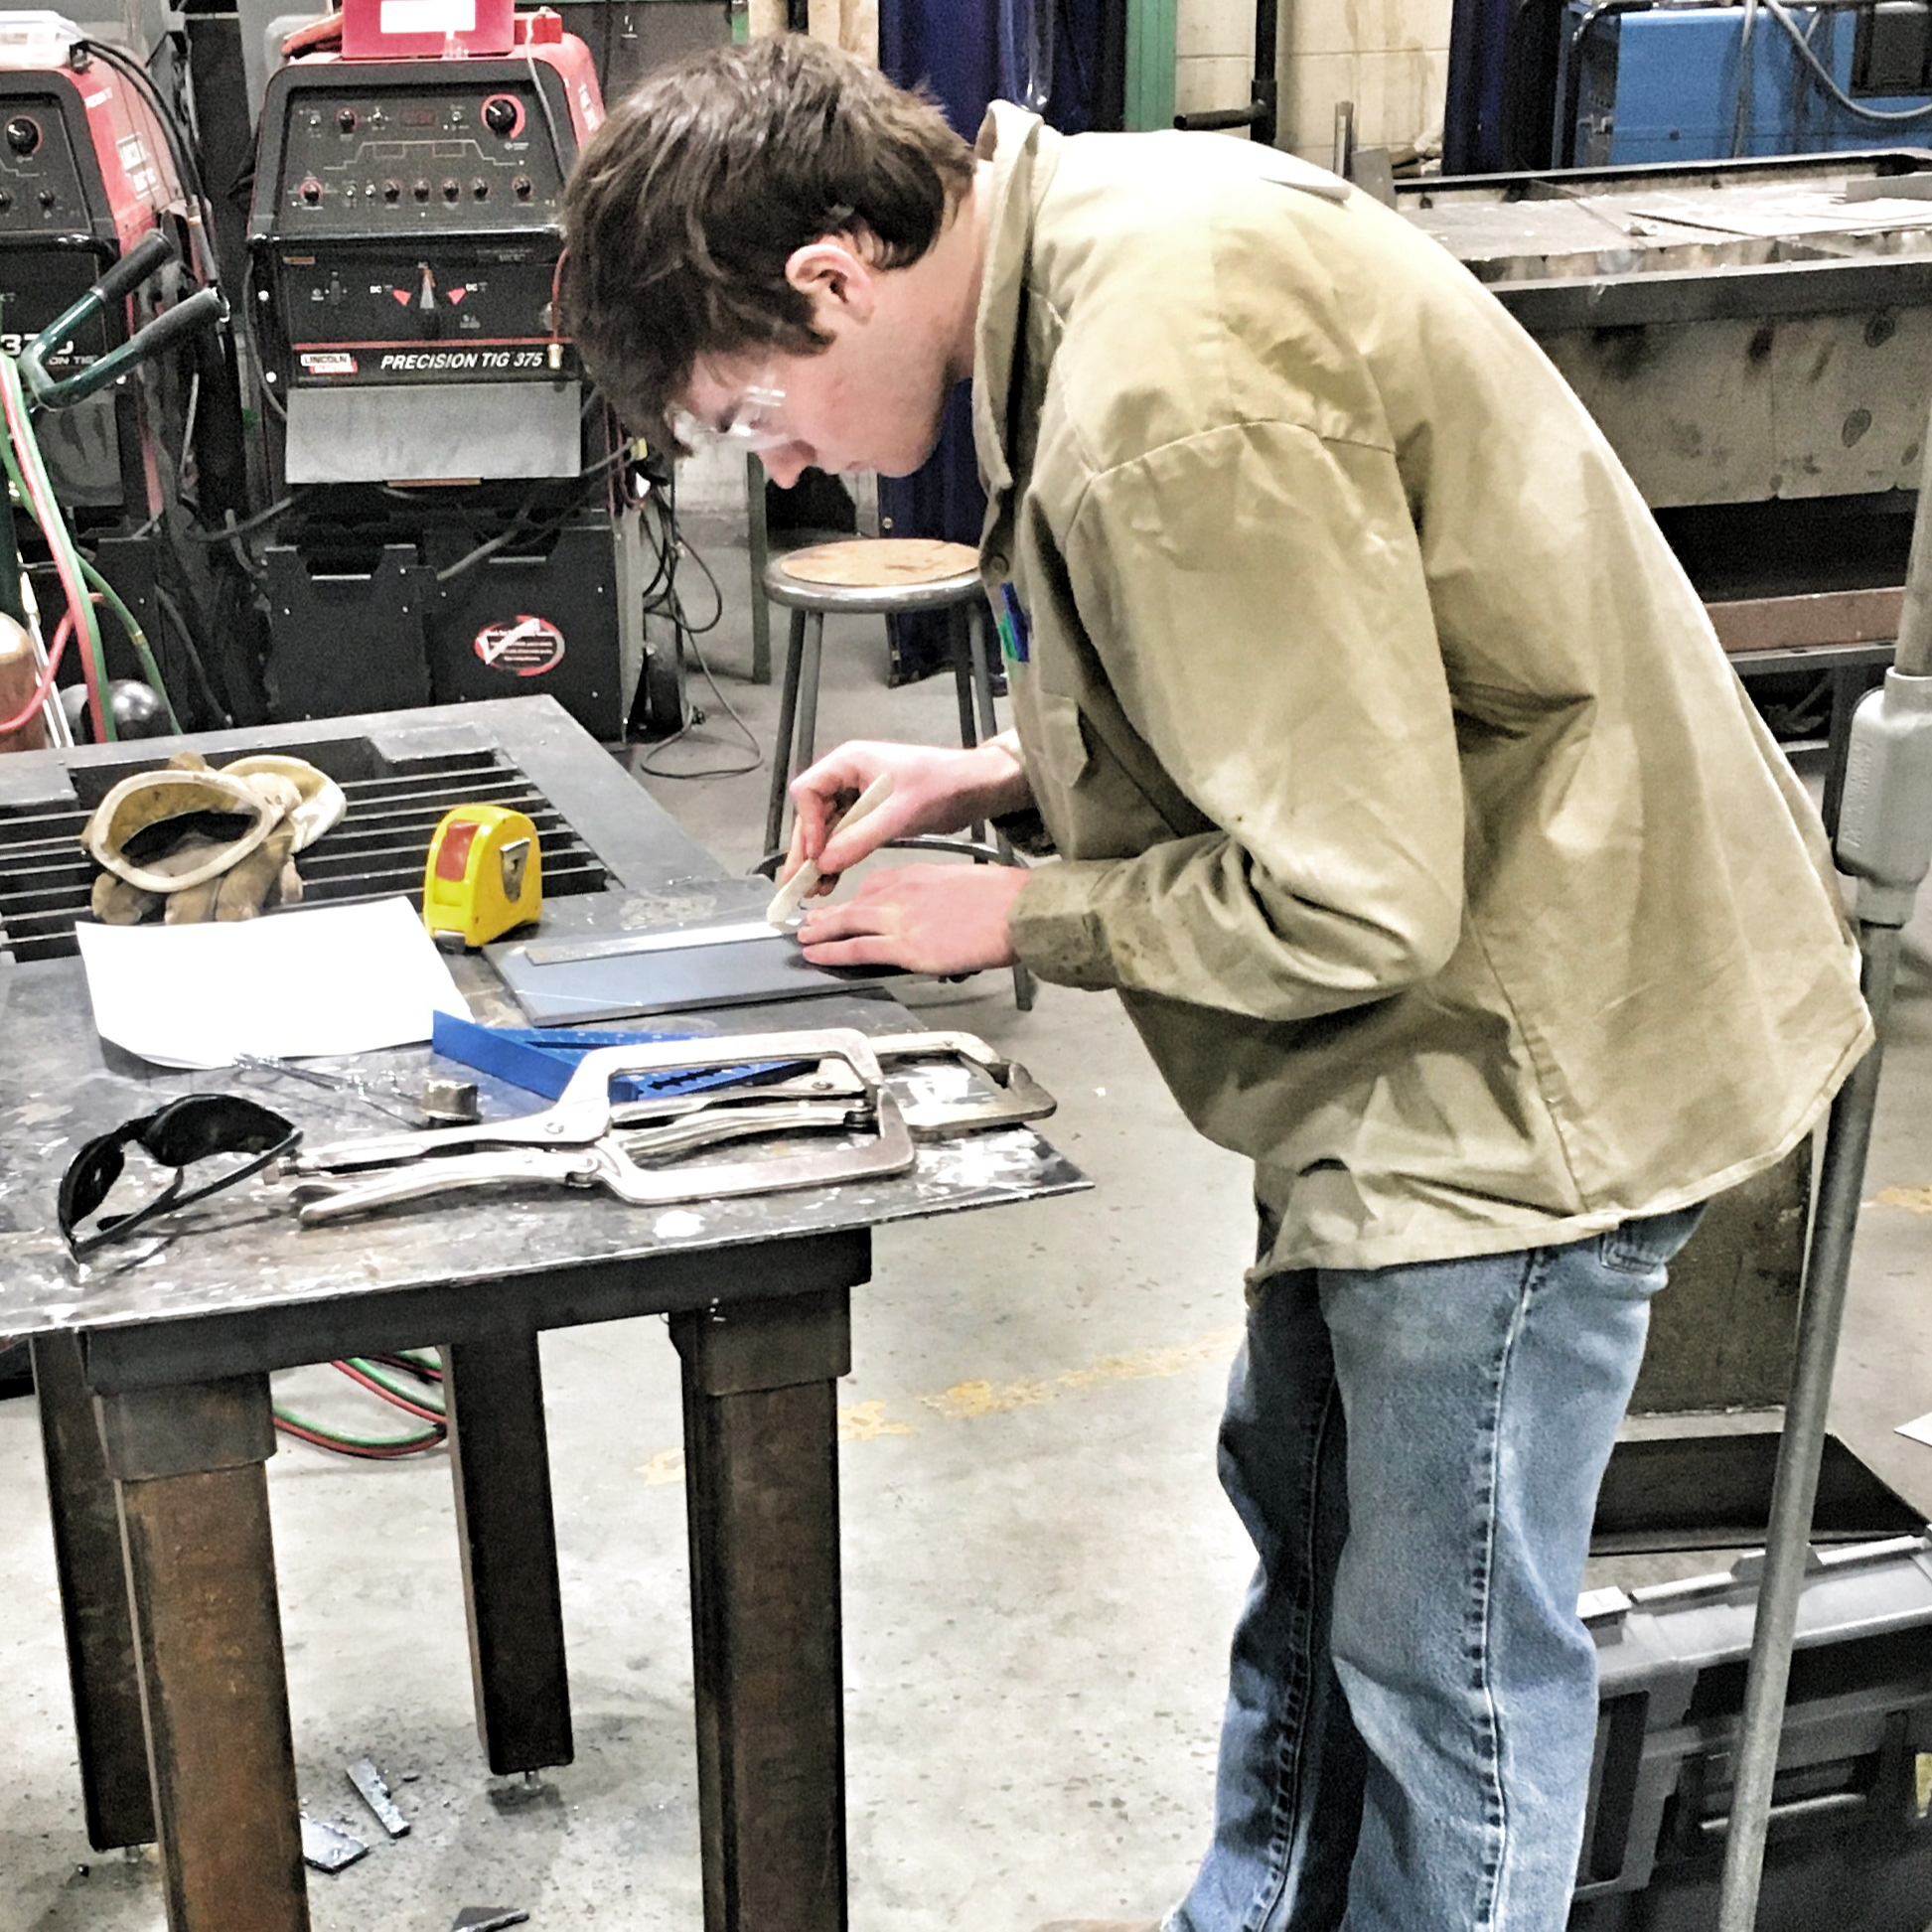 SkillsUSA member competes in the welding portion of competition